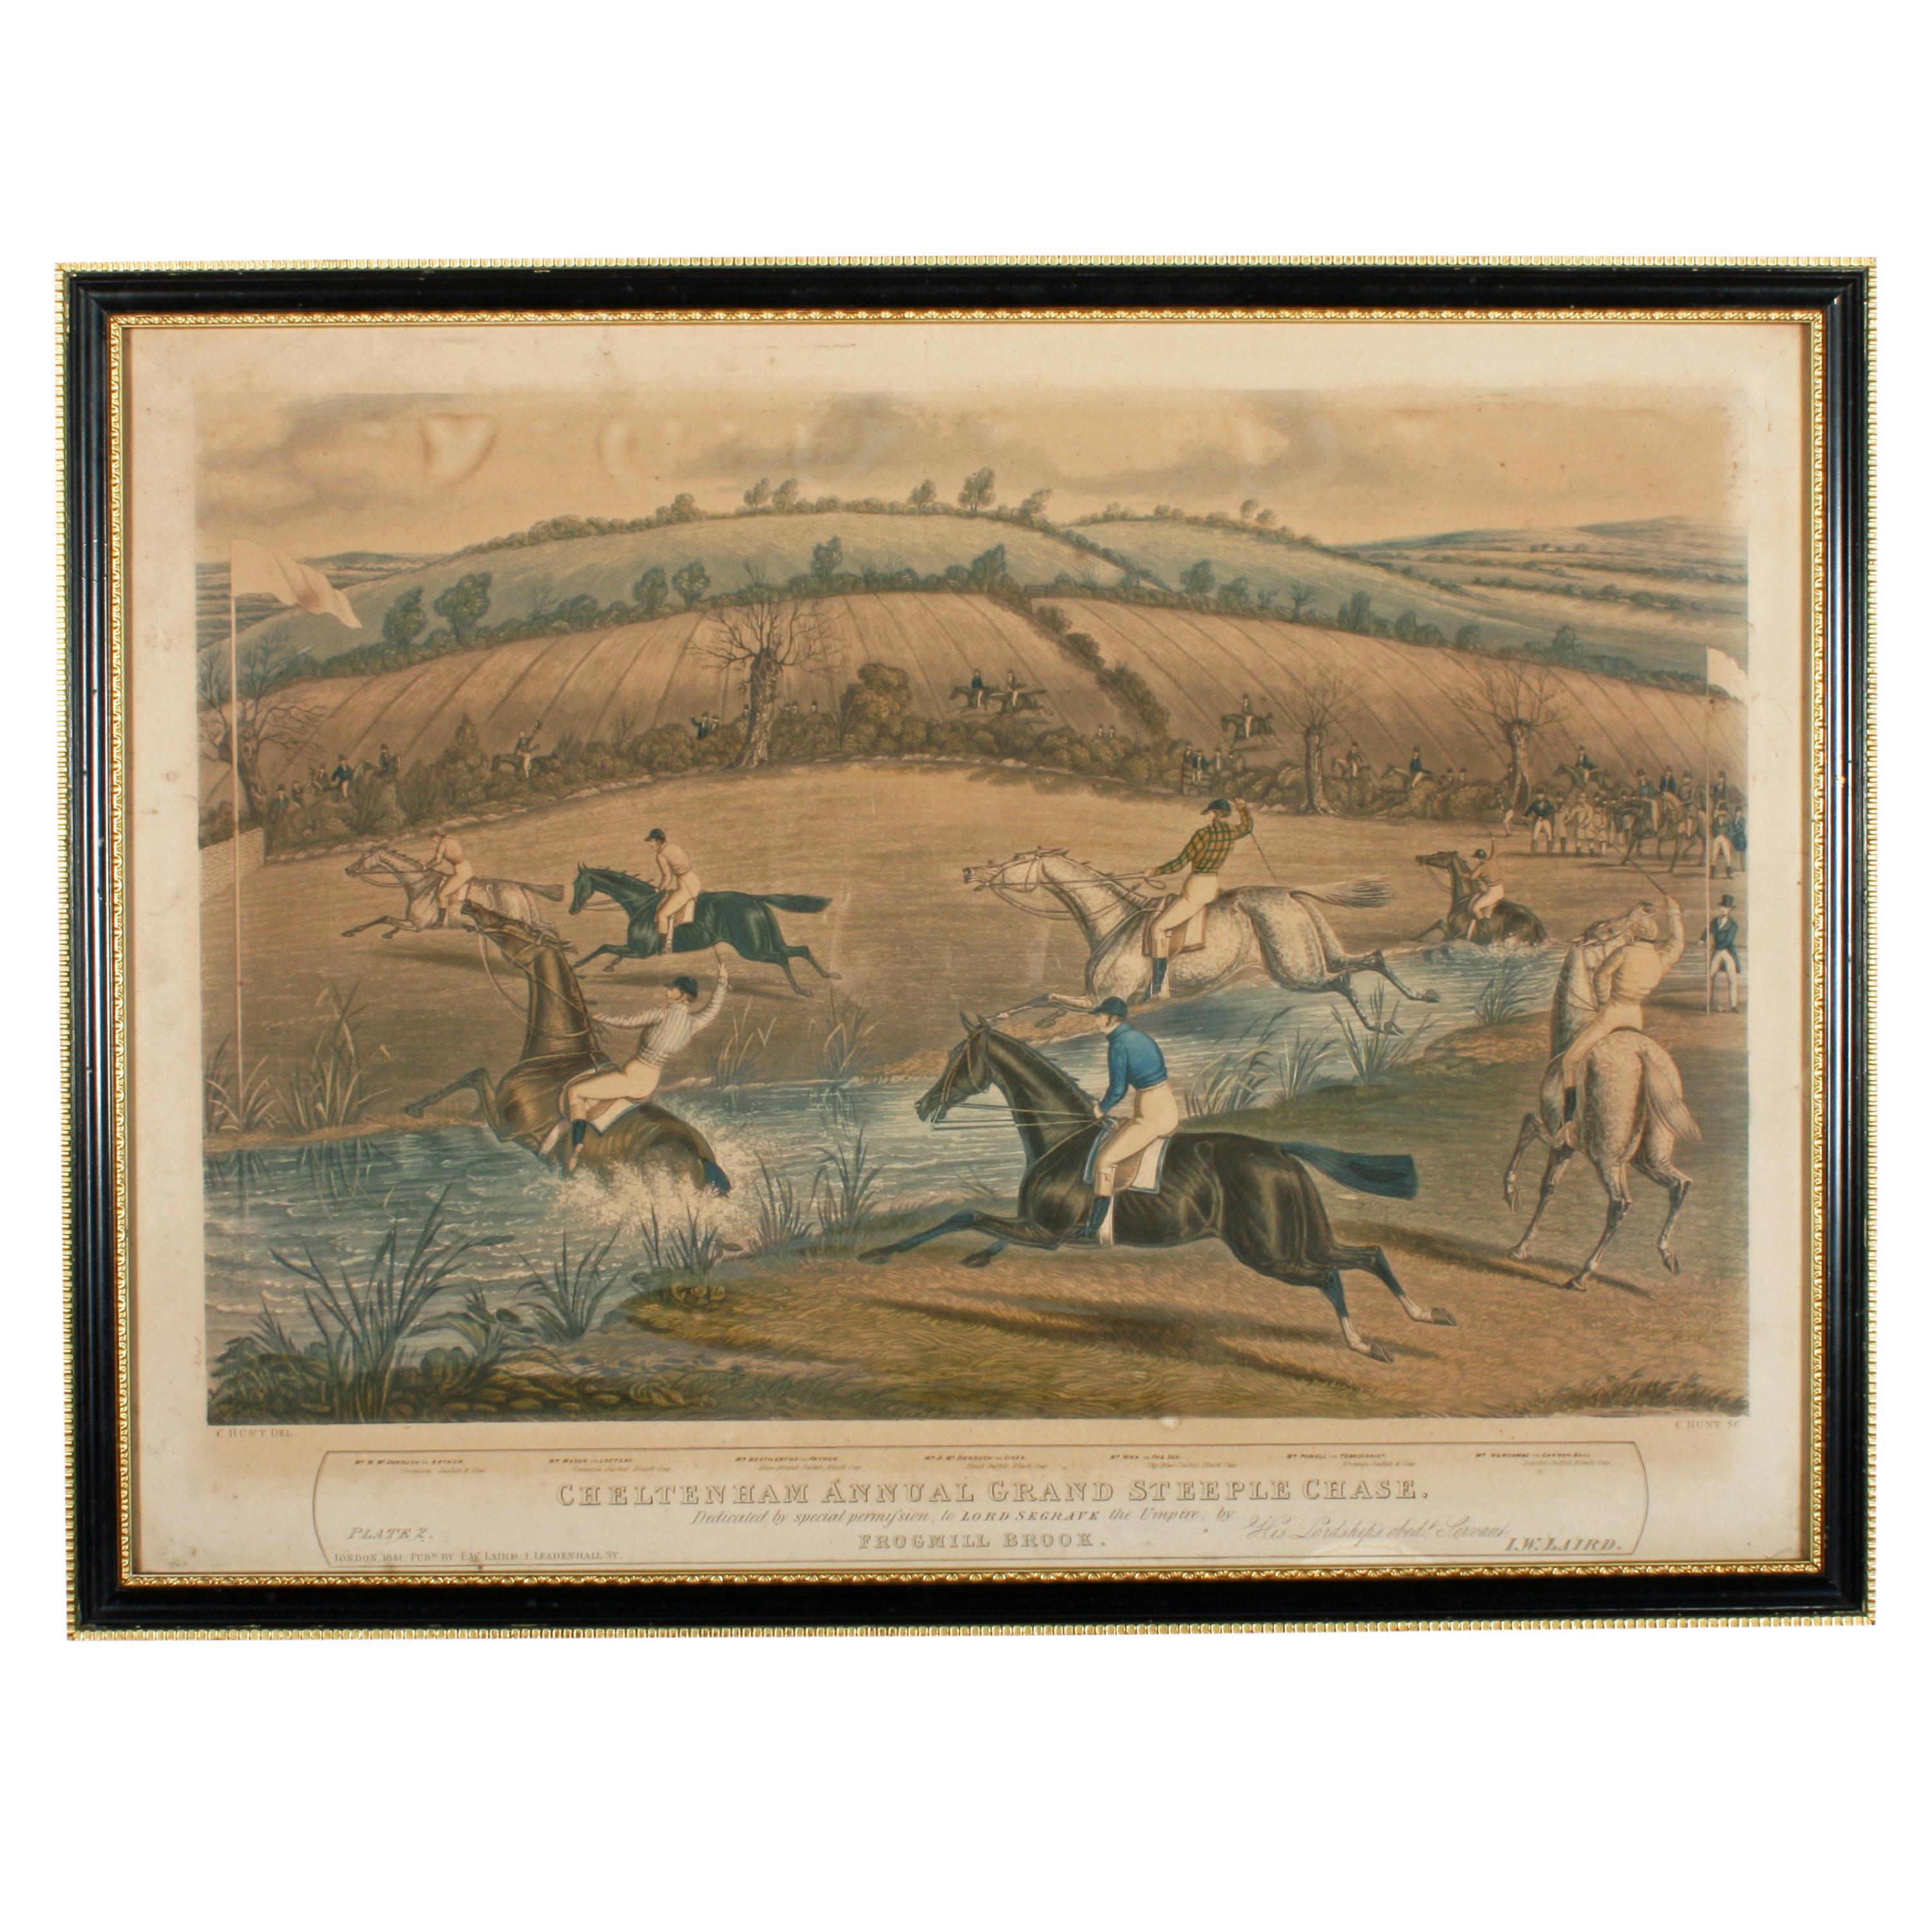 English Cheltenham Grand Steeple Chase Etchings For Sale